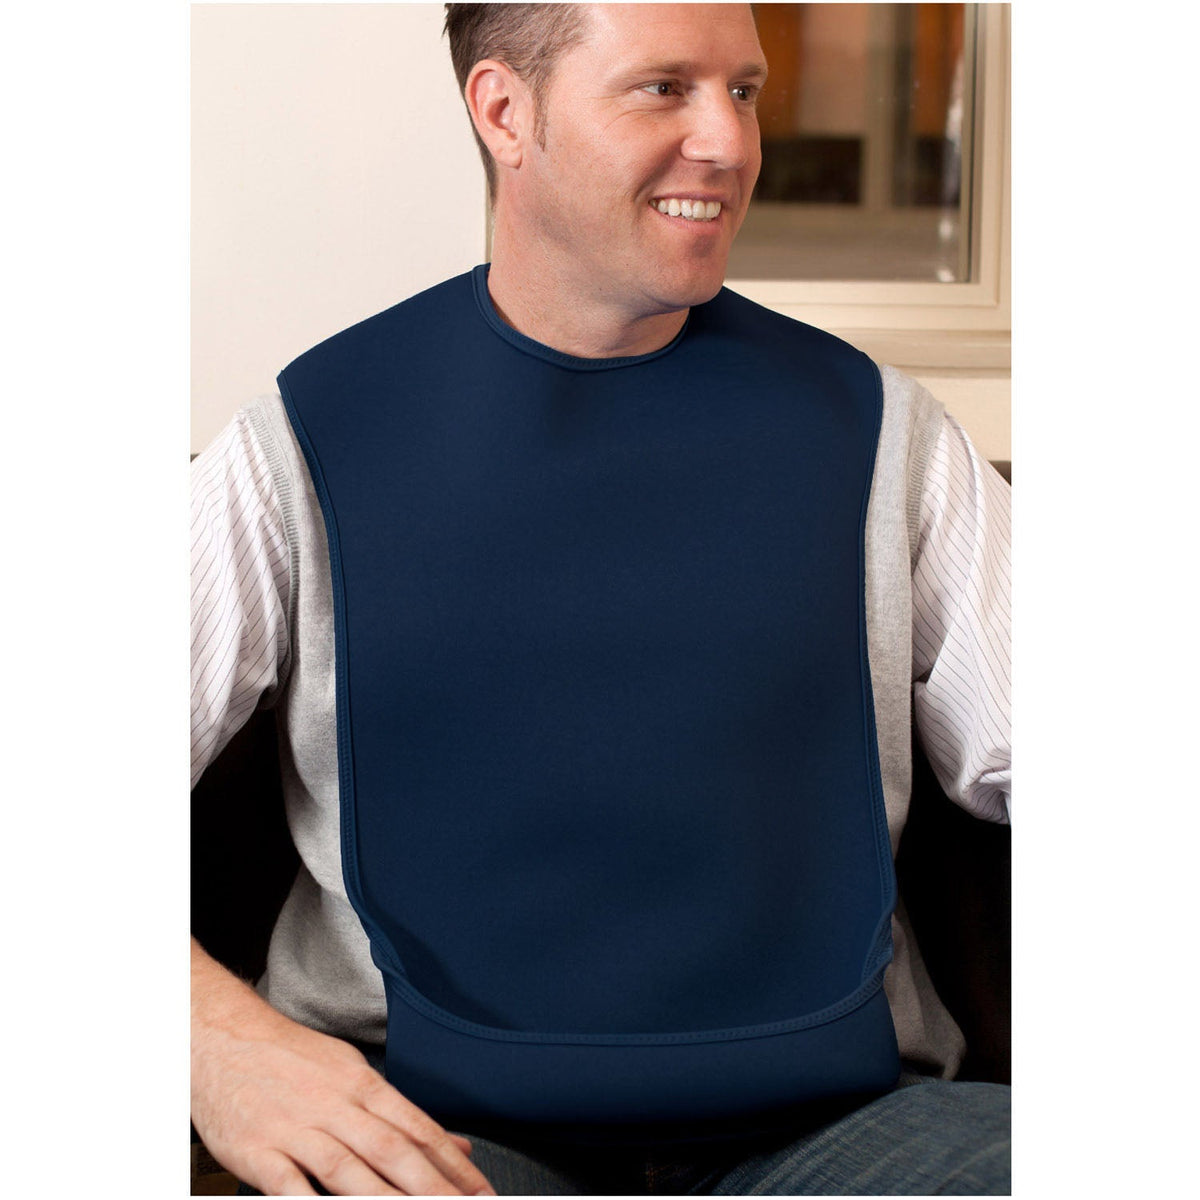 Tabard style adult bib - Small Navy (UK VAT Exempt) | Health Care | Care Designs